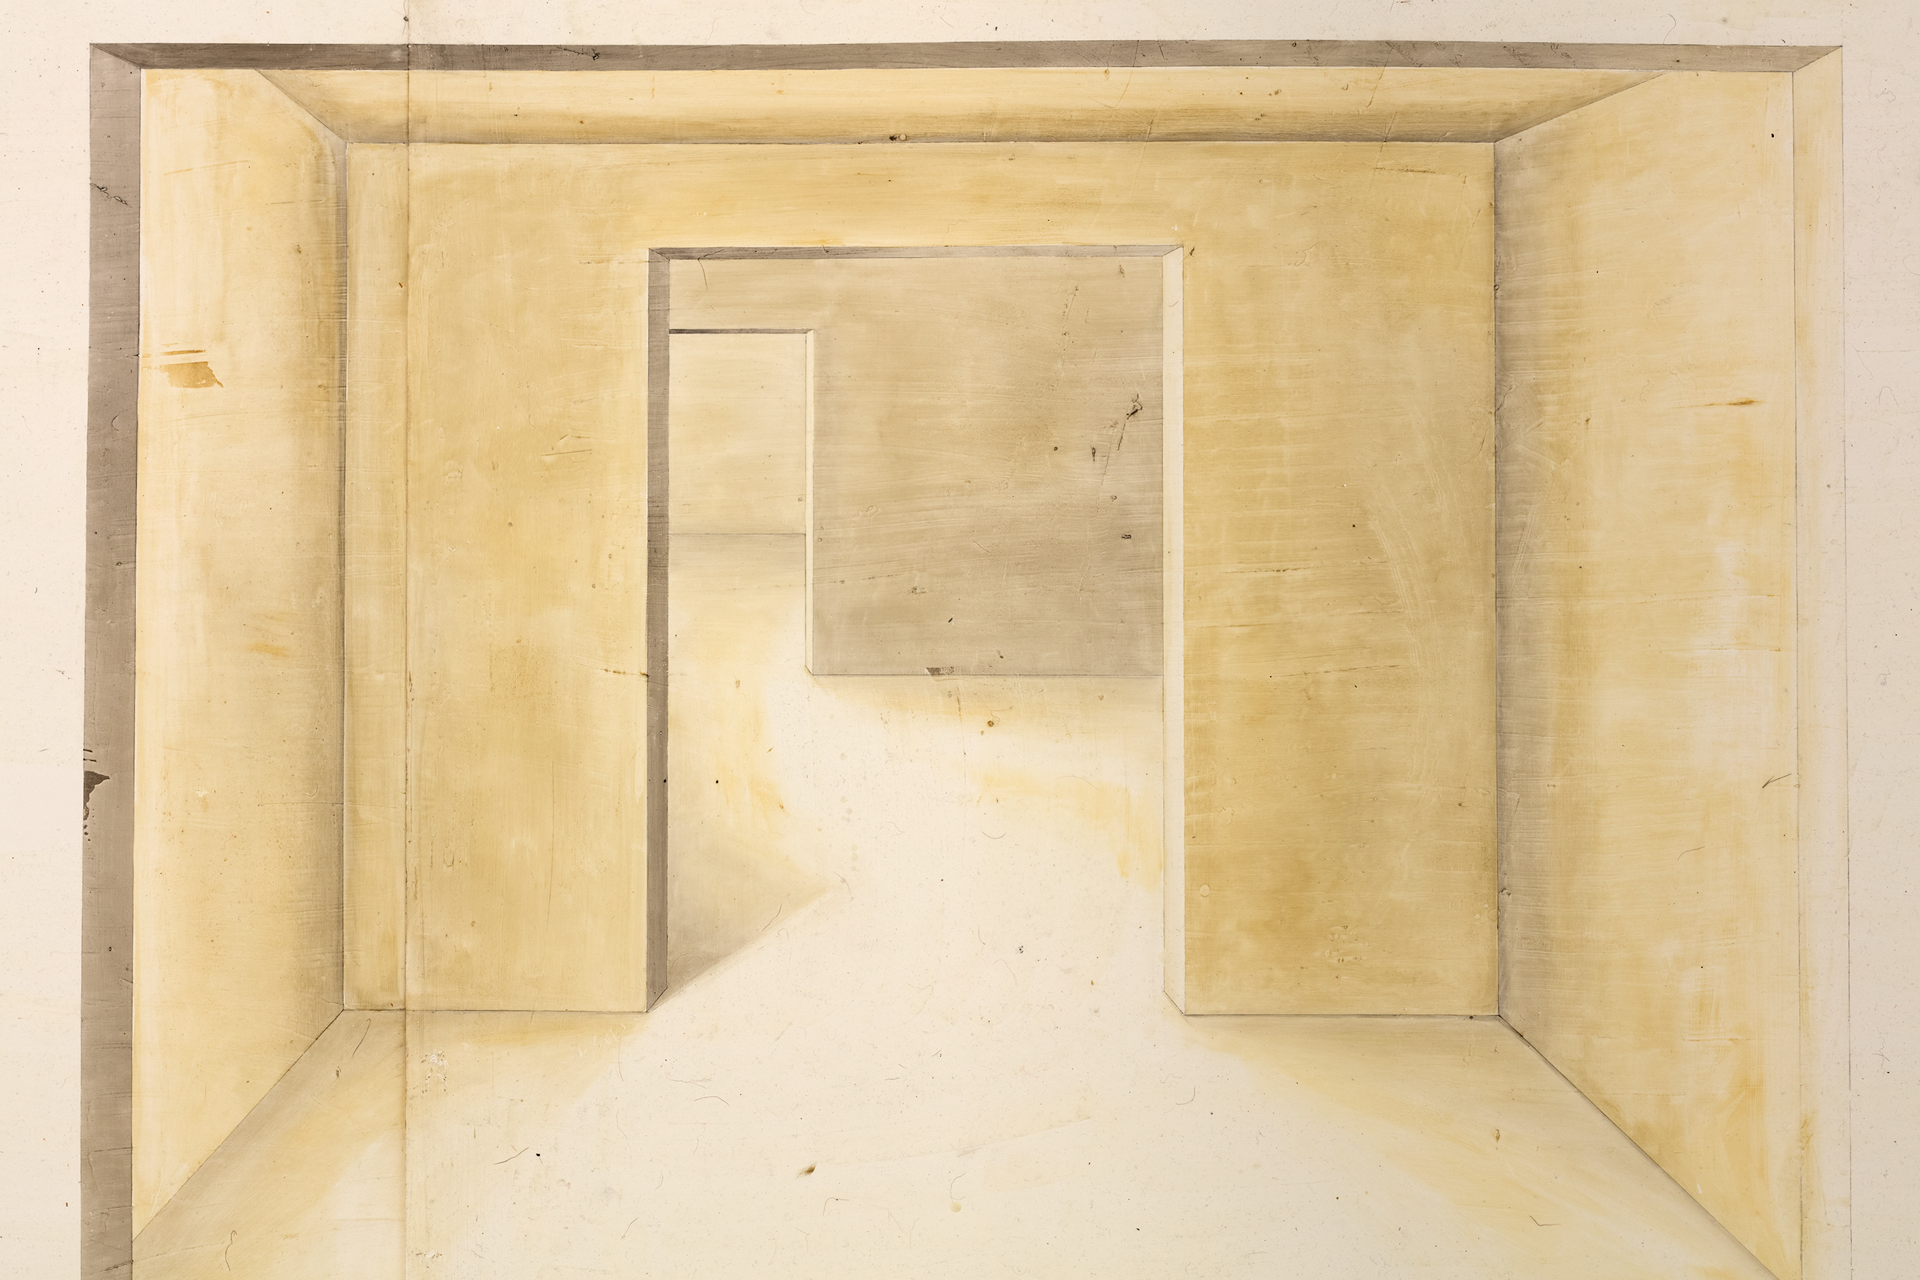 An oil and wax work on paper by Toba Khedoori, titled Untitled (rooms), dated 2001.